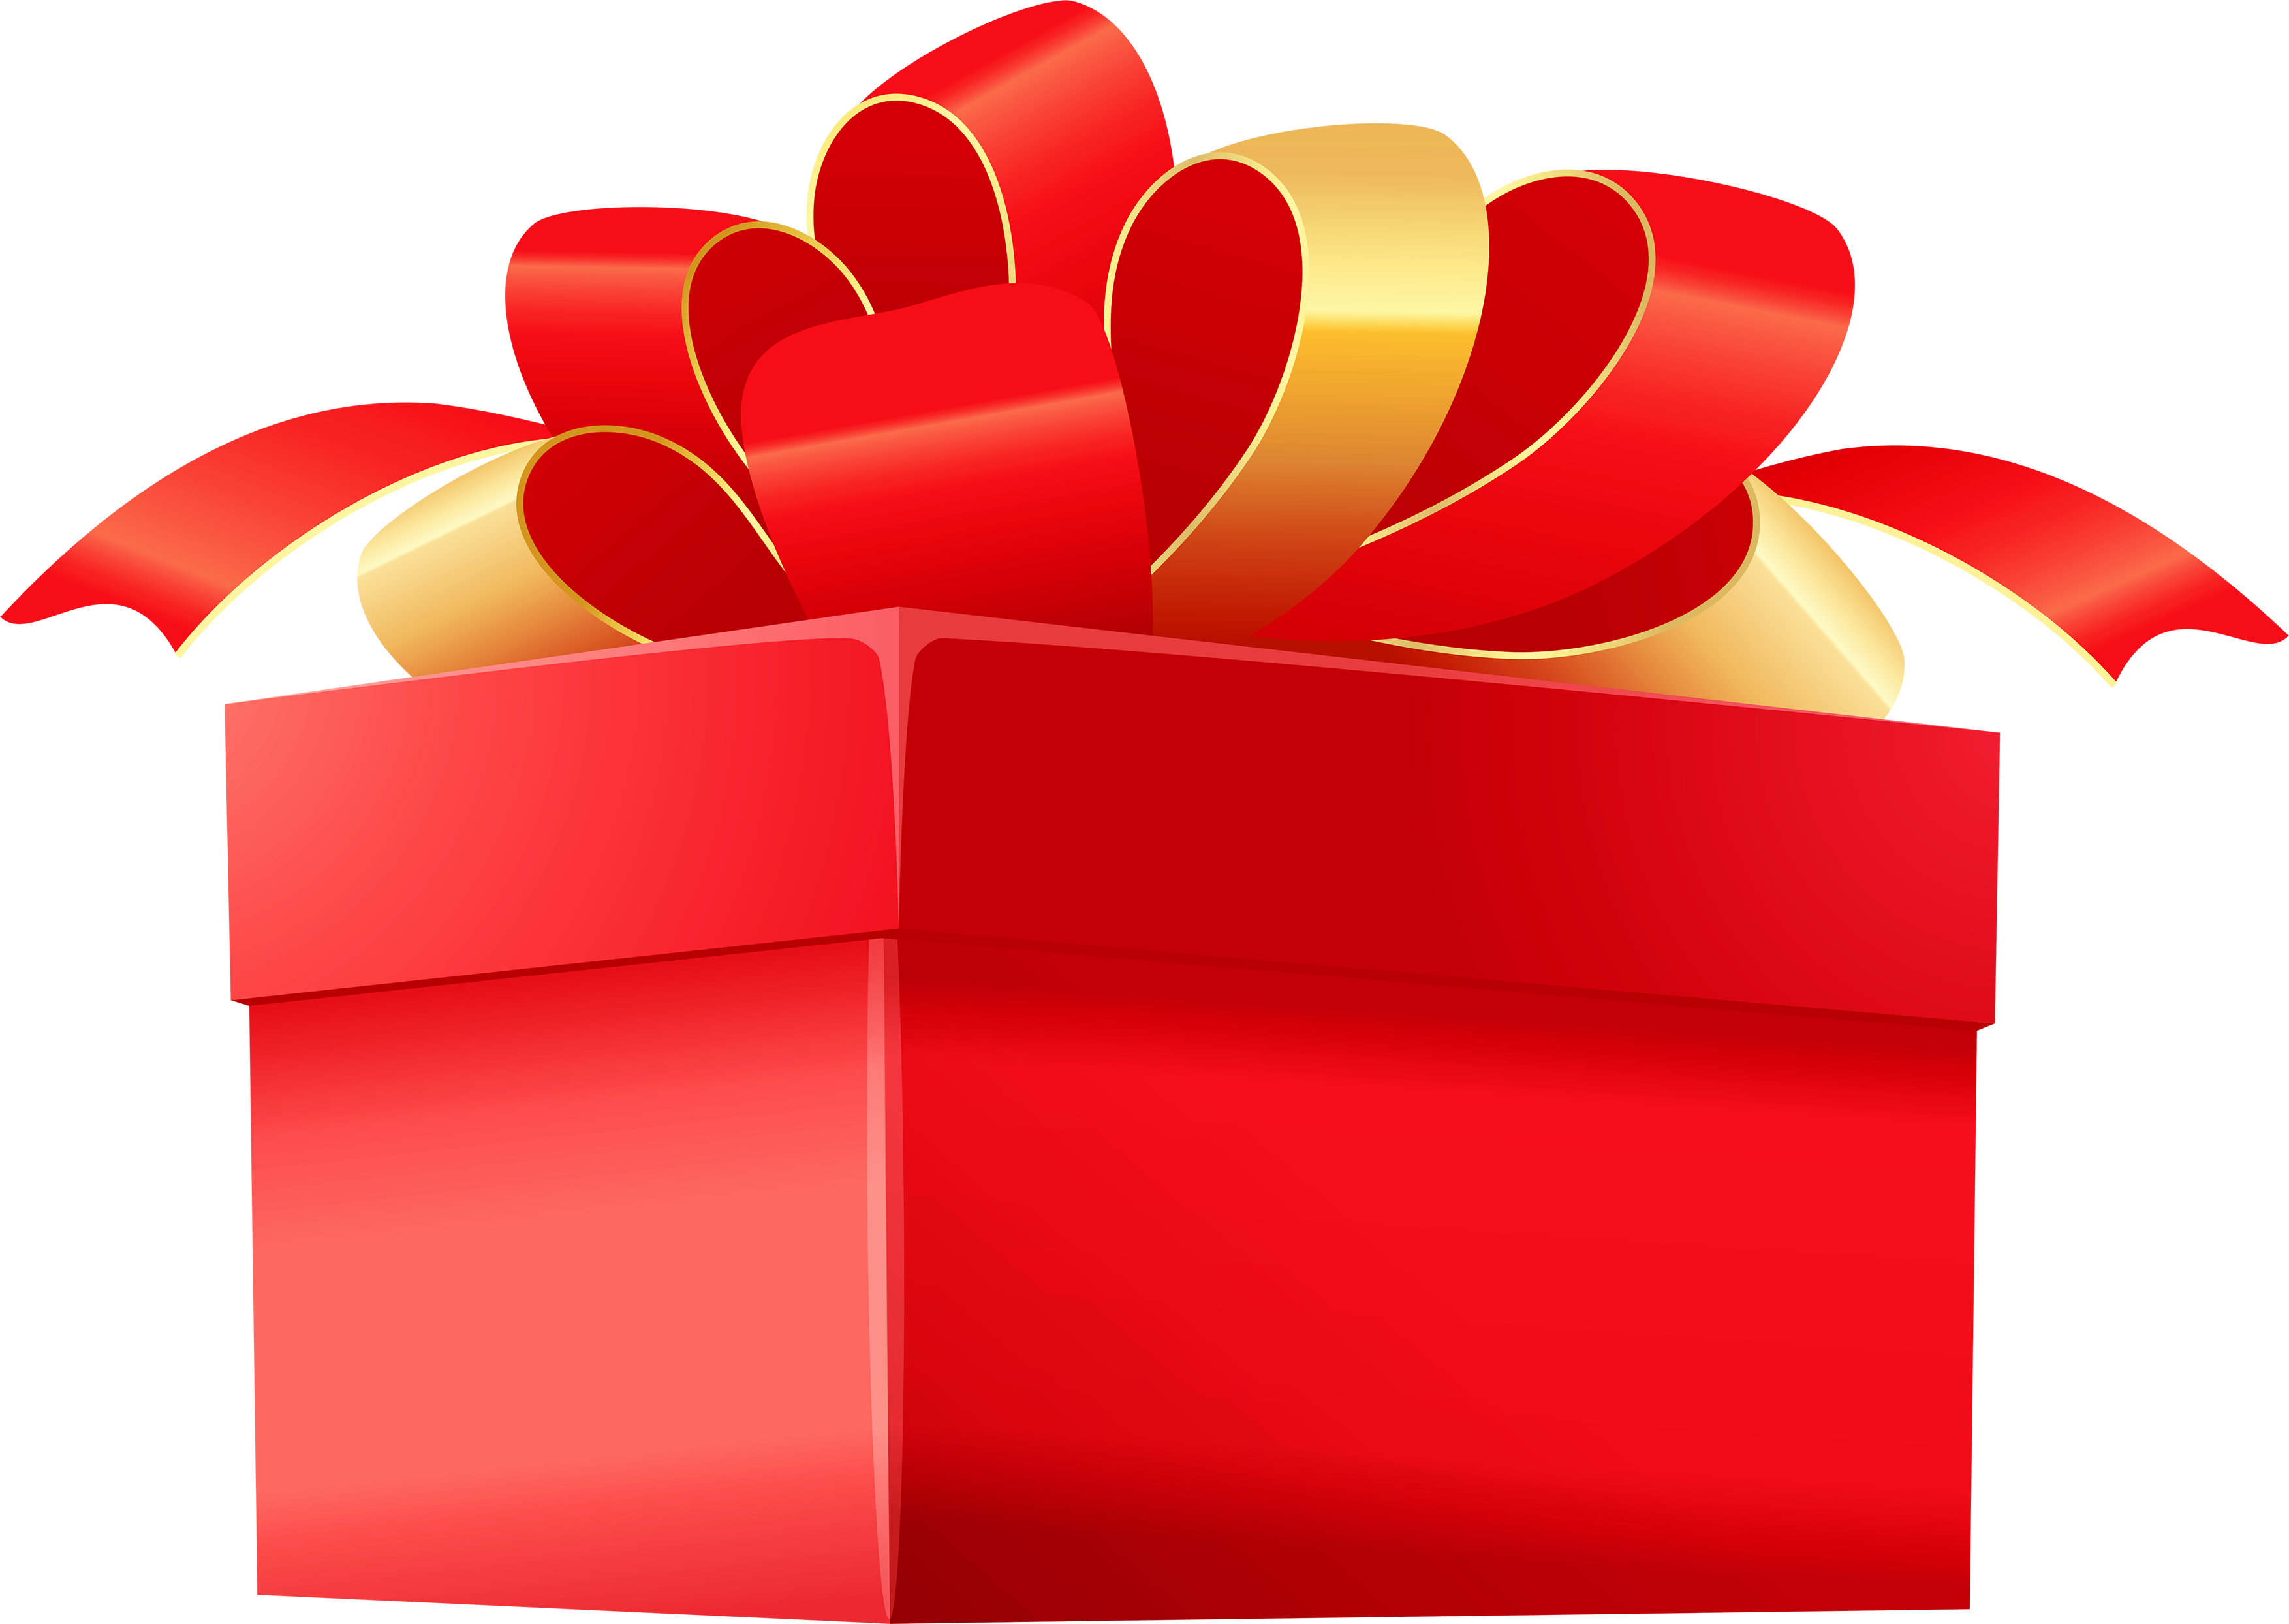 Gift box PNG image transparent image download, size: 3507x2488px